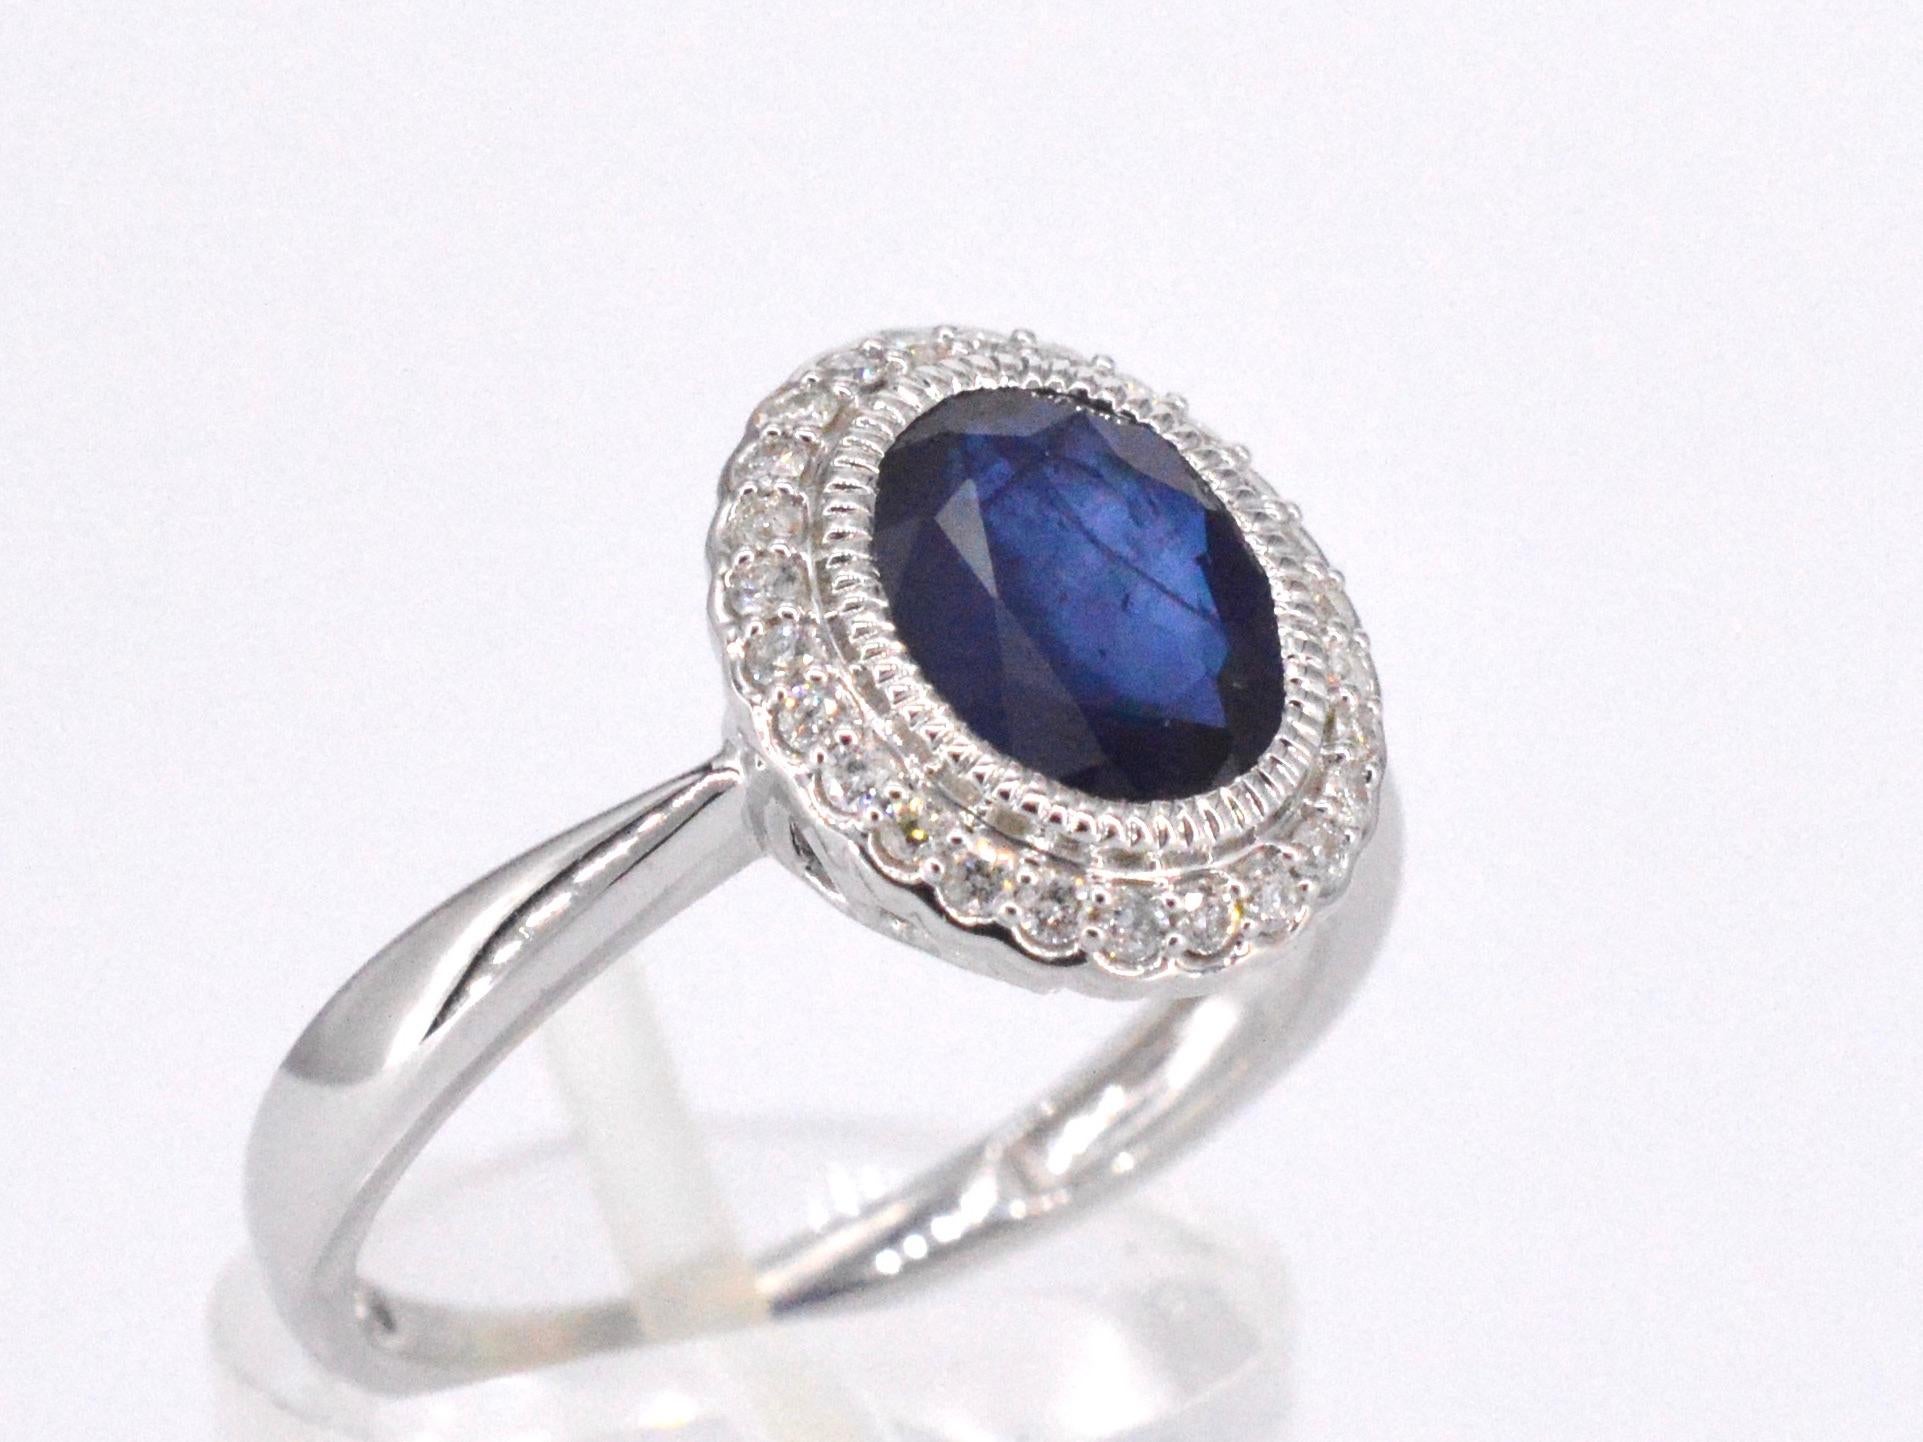 Women's White Gold Entourage Ring with Diamonds and Sapphire